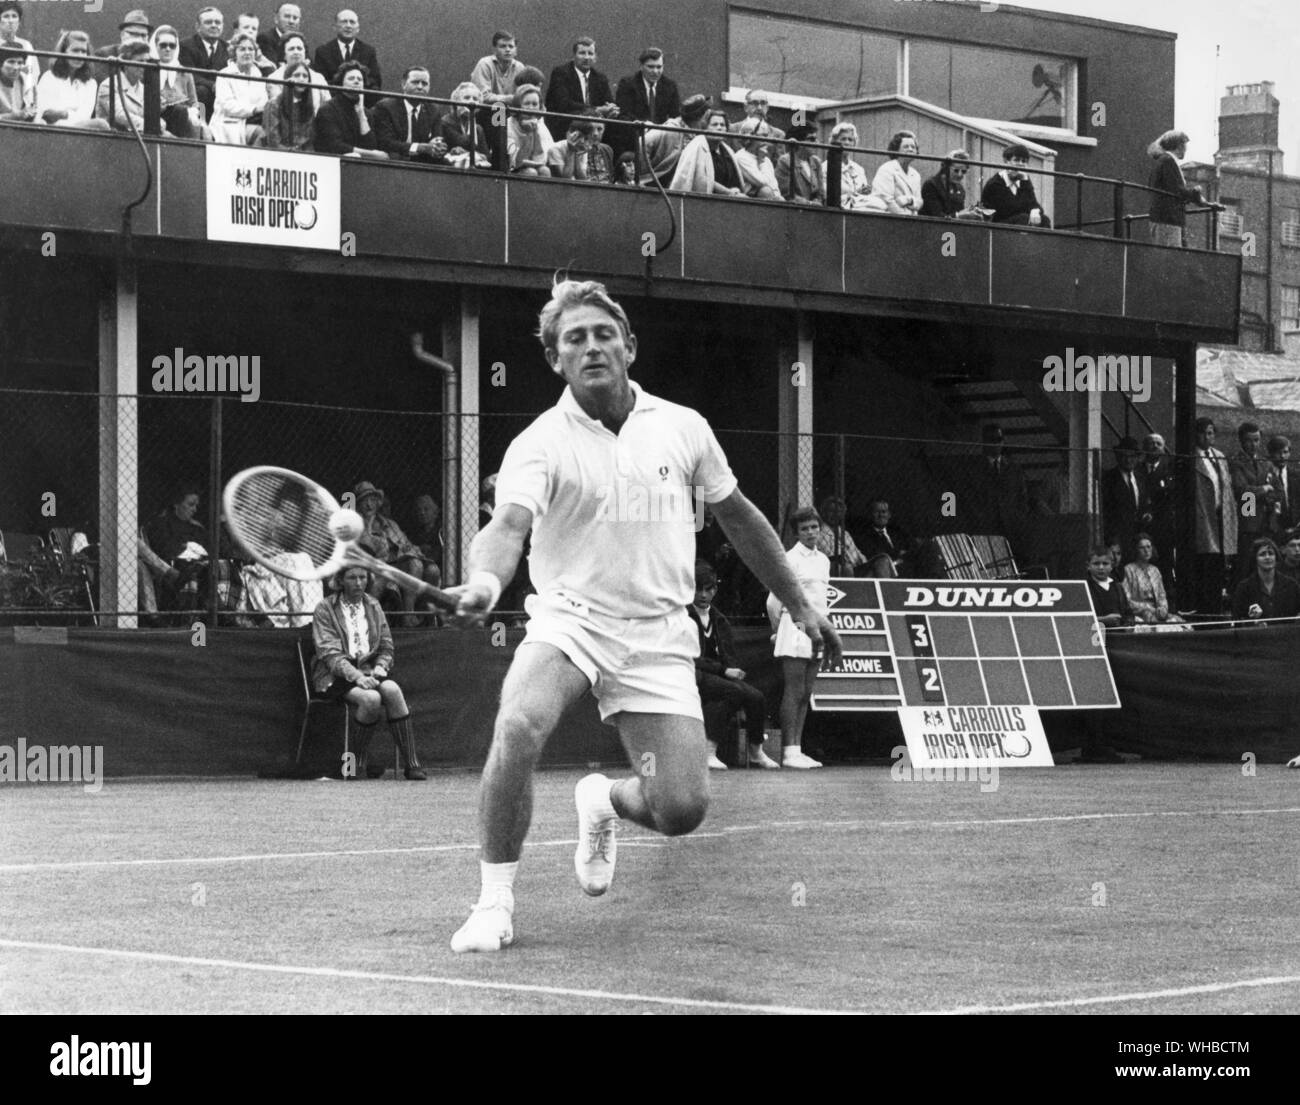 Lew Hoad - Australian tennis player in play at the Irish Championships. Lewis Alan (Lew) Hoad (born November 23, 1934 in Glebe, New South Wales, Australia, died July 3, 1994 in Fuengirola, Spain) was a champion tennis player. ranked as one of the 21 best players of all time. For five straight years, beginning in 1952, he was ranked in the World Top Ten for amateurs, reaching the No. 1 spot in 1956.. Stock Photo